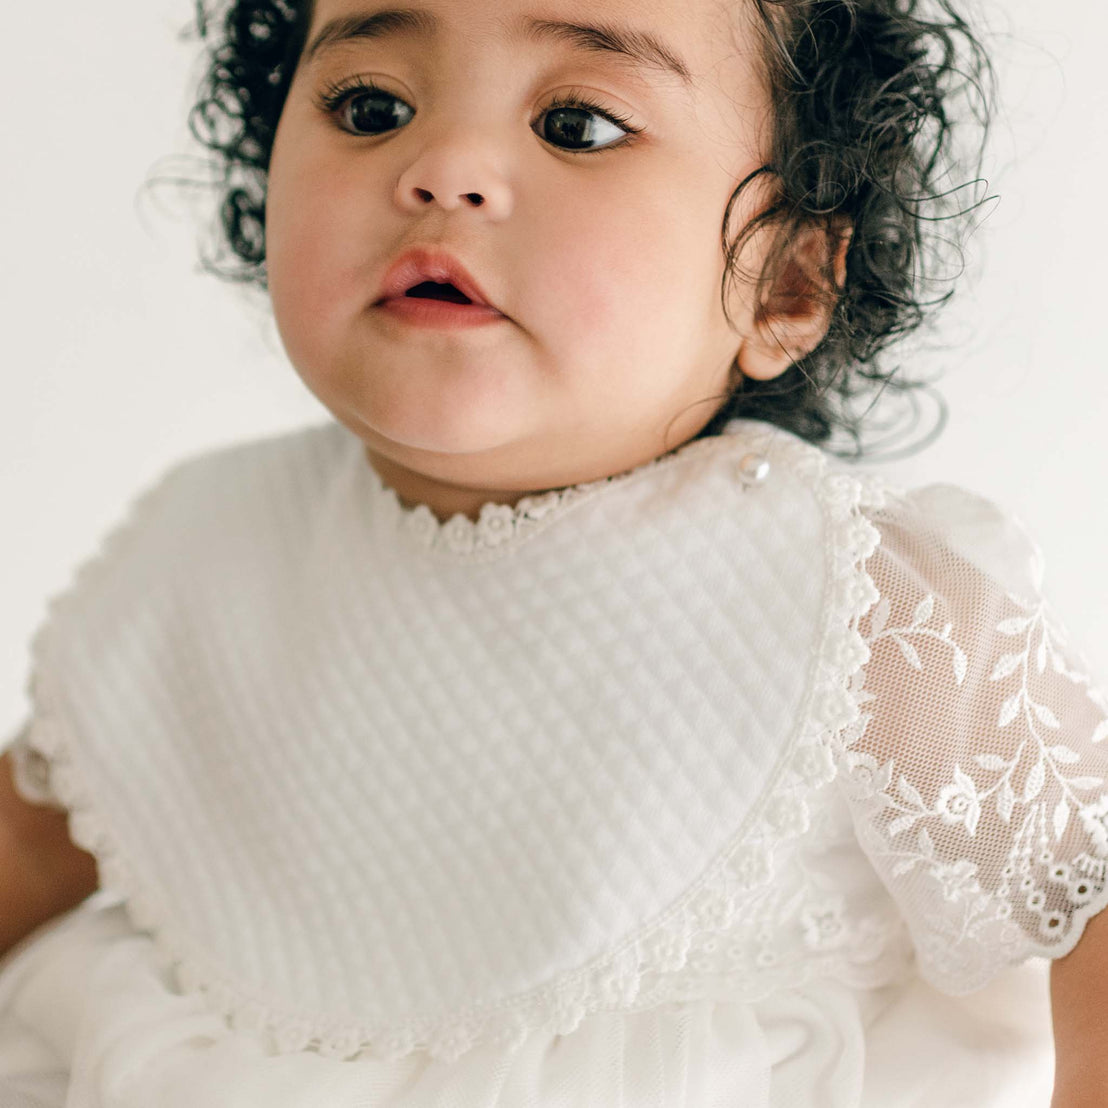 A baby with curly hair and expressive eyes wearing a white outfit with lace detailing and a vintage touch, looking slightly off-camera. The attire includes the Ella Bib made of quilted cotton and short sleeves featuring an intricate floral lace pattern. The background is plain and light.